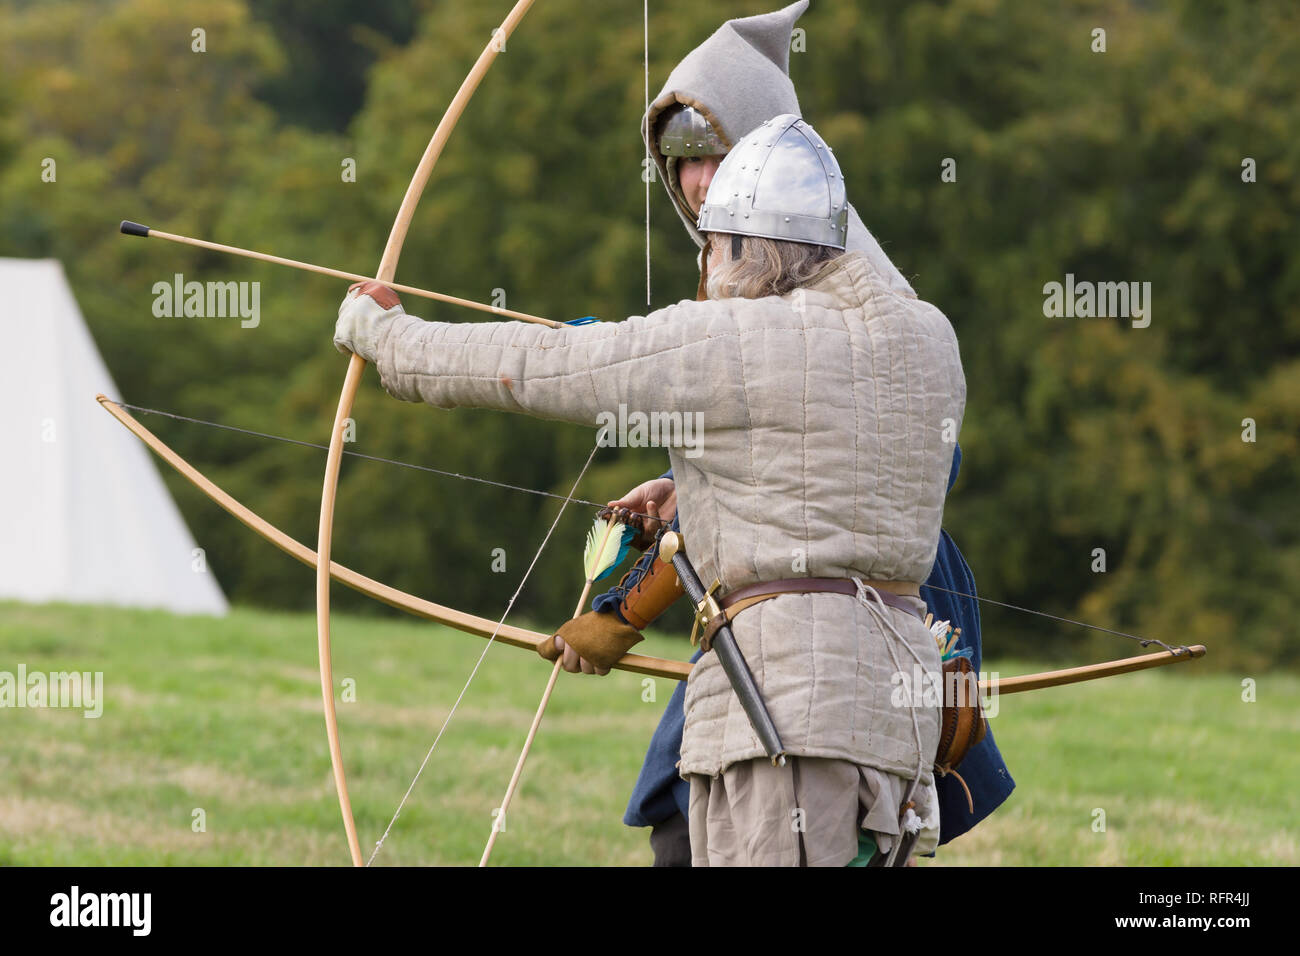 Medieval re-enactors dressed as archers of the 12th century equiped with a long bows re-enacting combat of the period Stock Photo